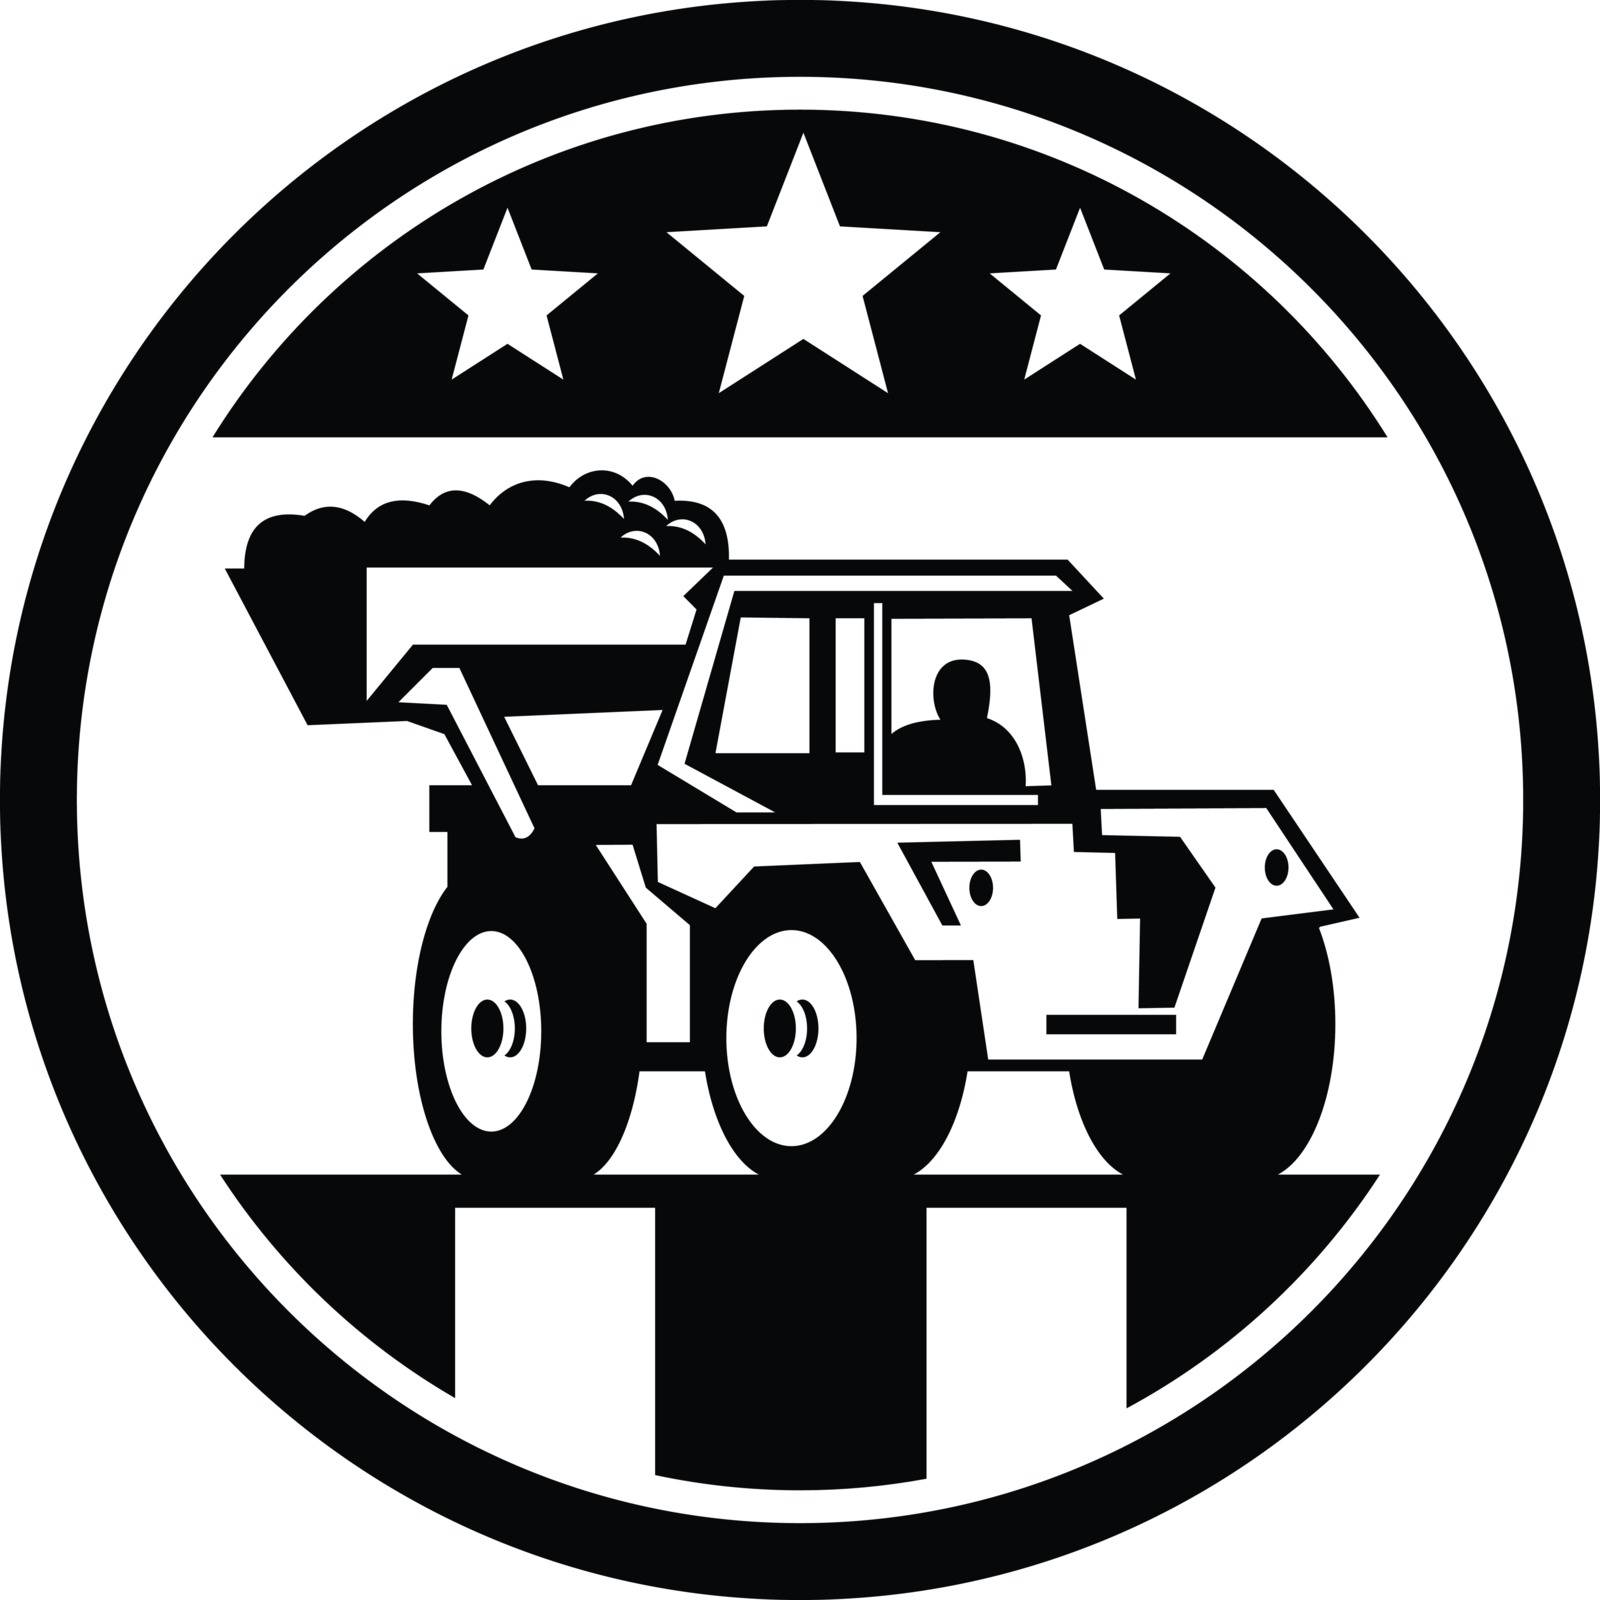 Icon retro style illustration of vintage mechanical digger excavator with USA American stars and stripes flag inside circle on isolated background in Black and White.